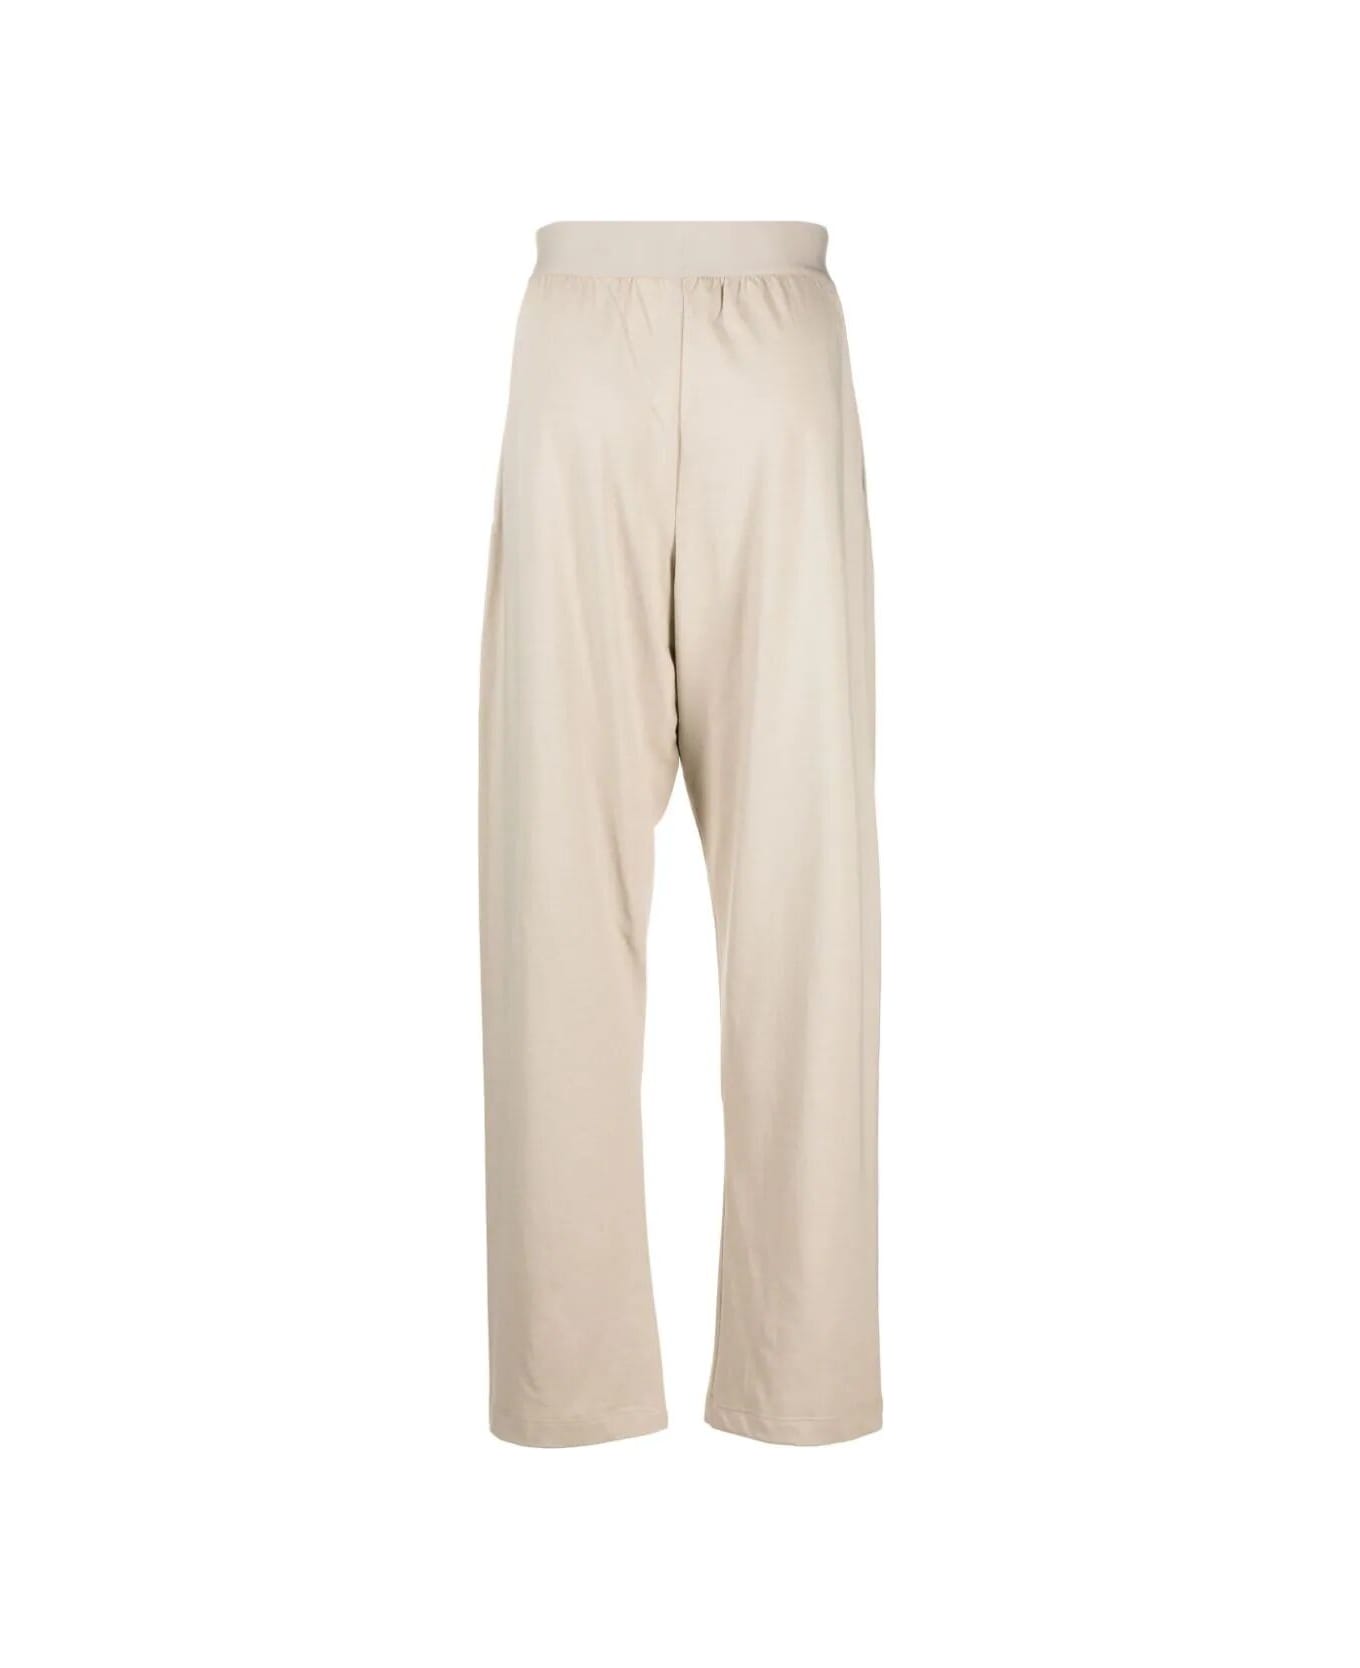 Fear of God Lounge Pant - Cement